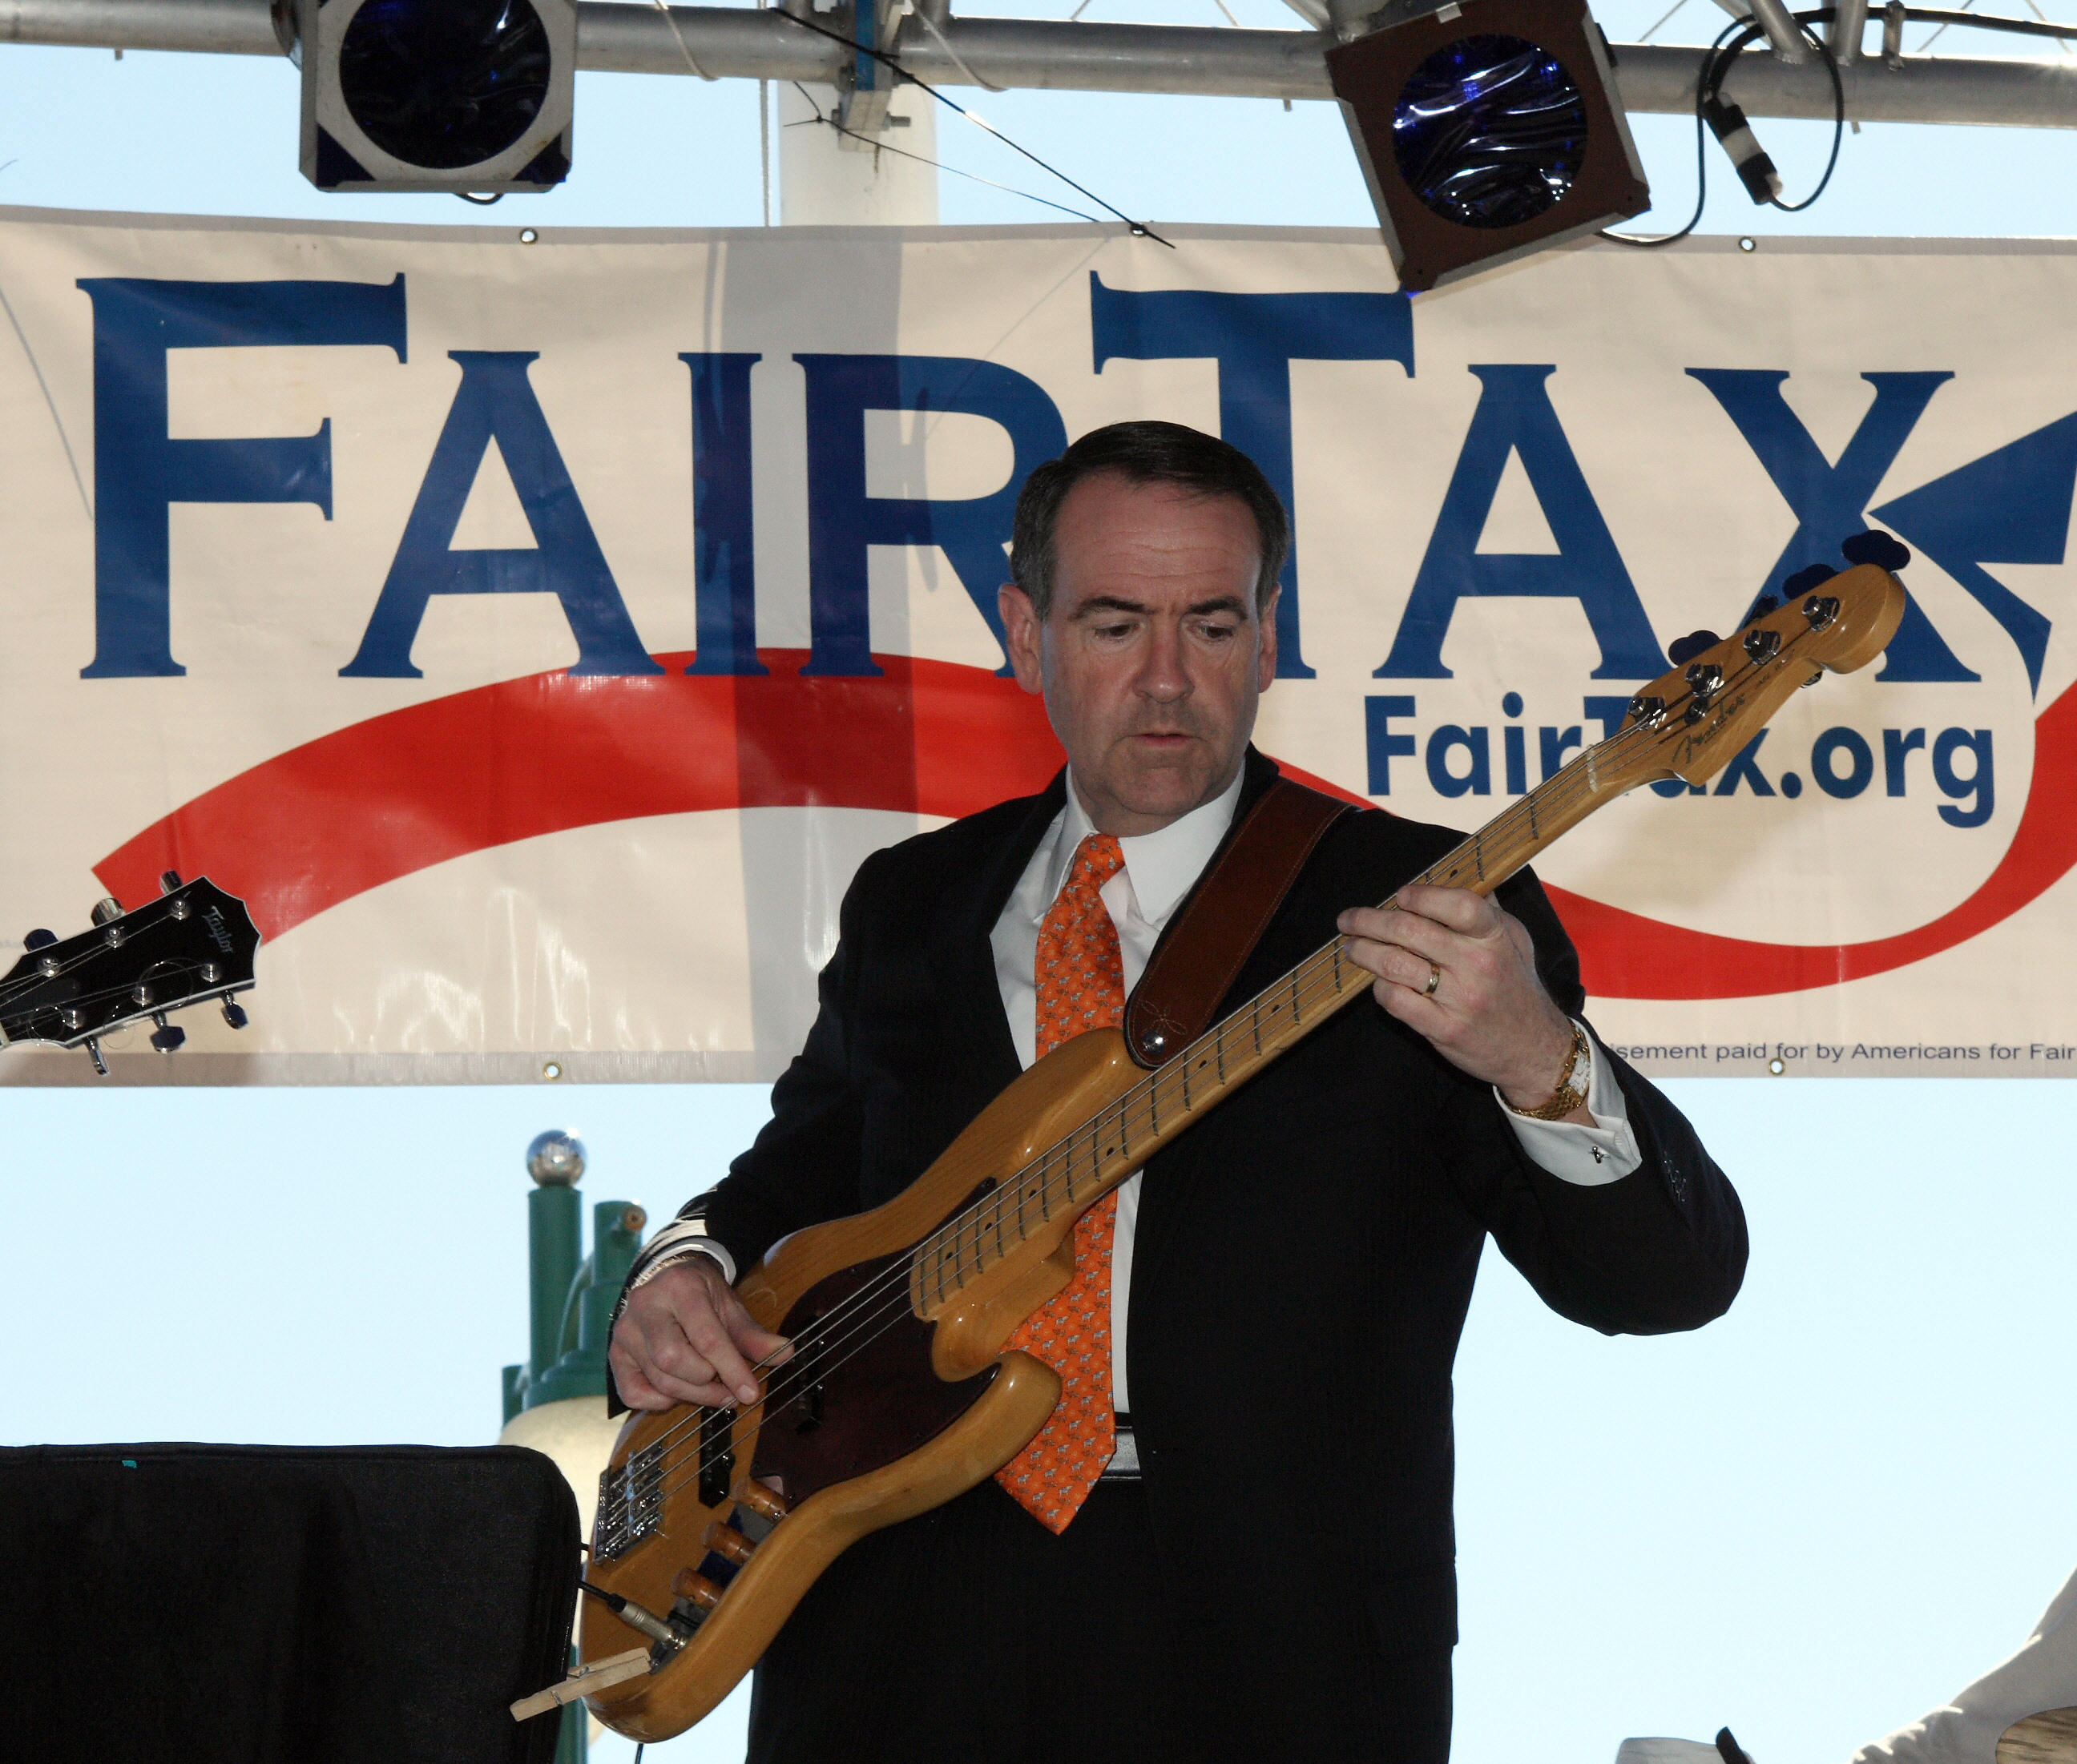 Mike Huckabee on stage playing an electric bass at a FairTax rally in Jacksonville, Florida, on January 27, 2008.